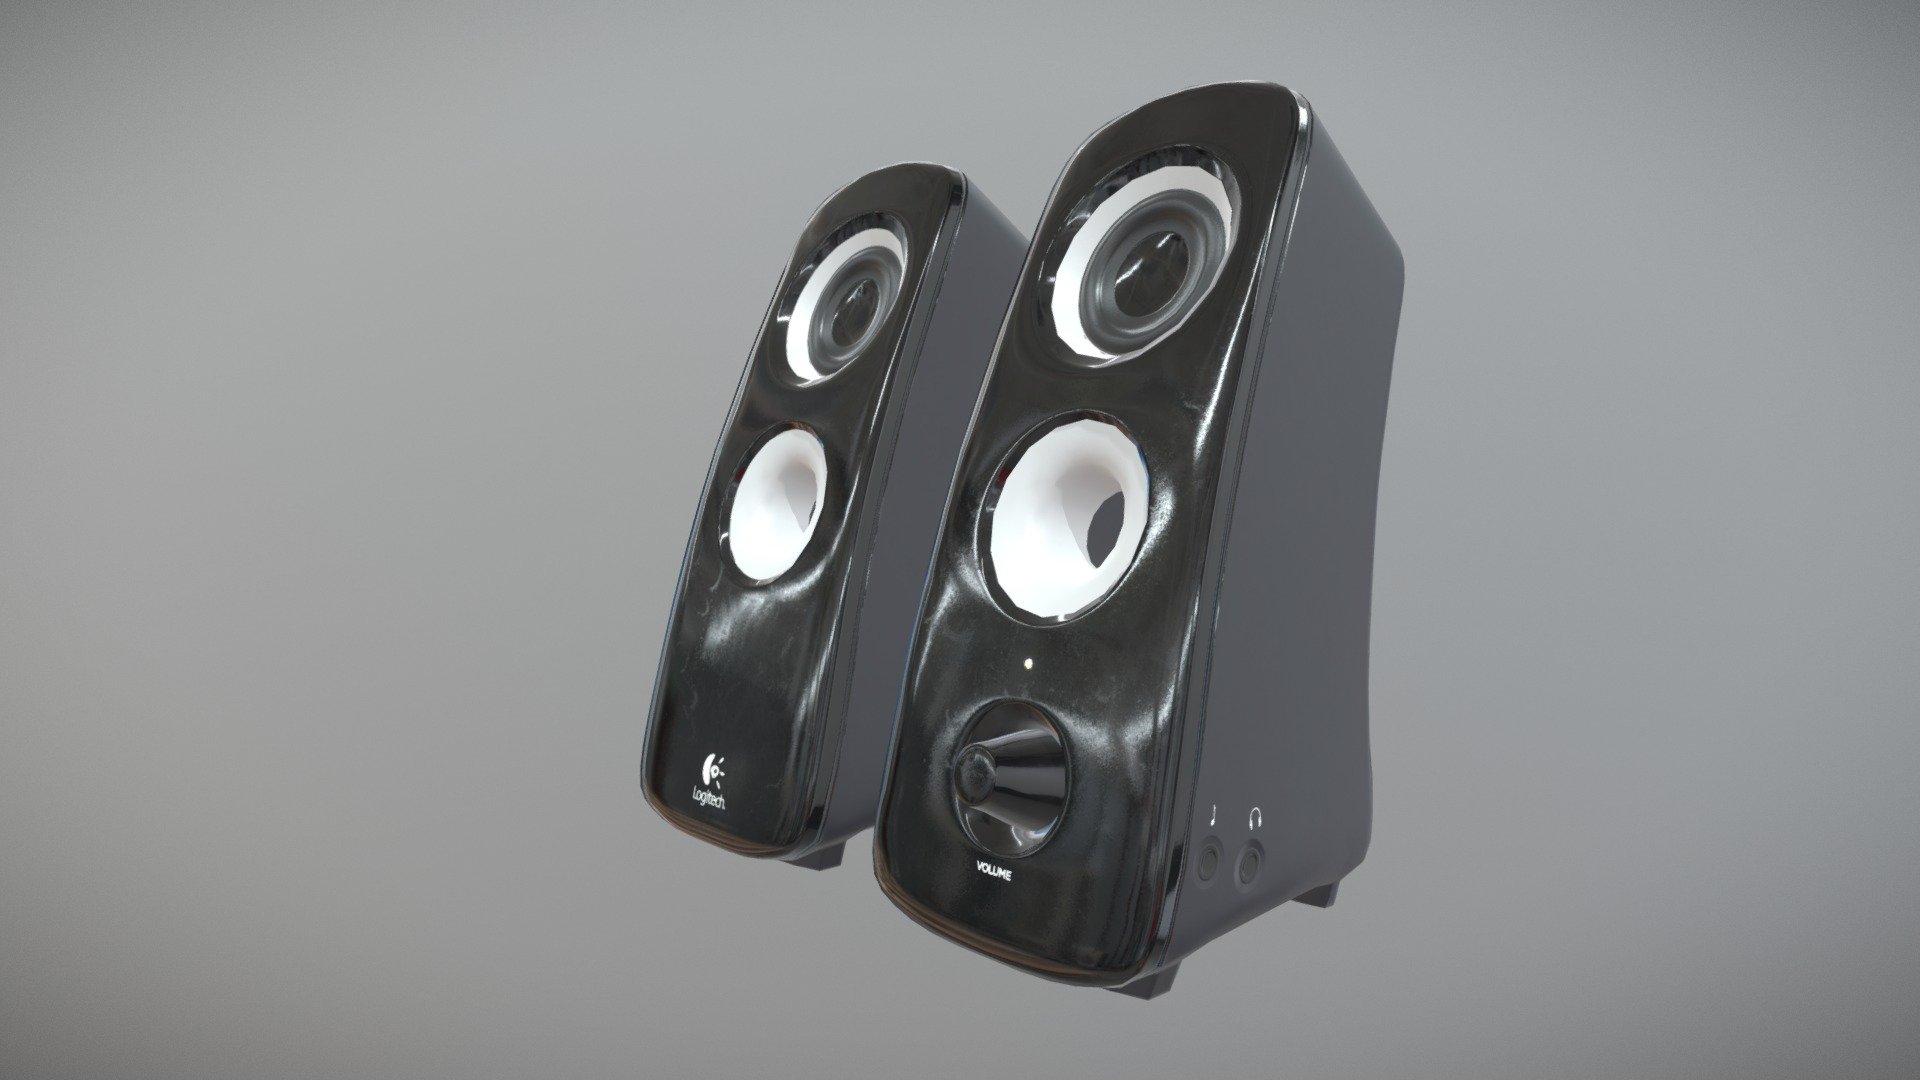 Logitech speakers a little bit dirty with use.

Modelized with Blender.

Textured with Substance Painter.

Baked with Marmoset Toolbag - Logitech speakers - 3D model by Moux 3d model